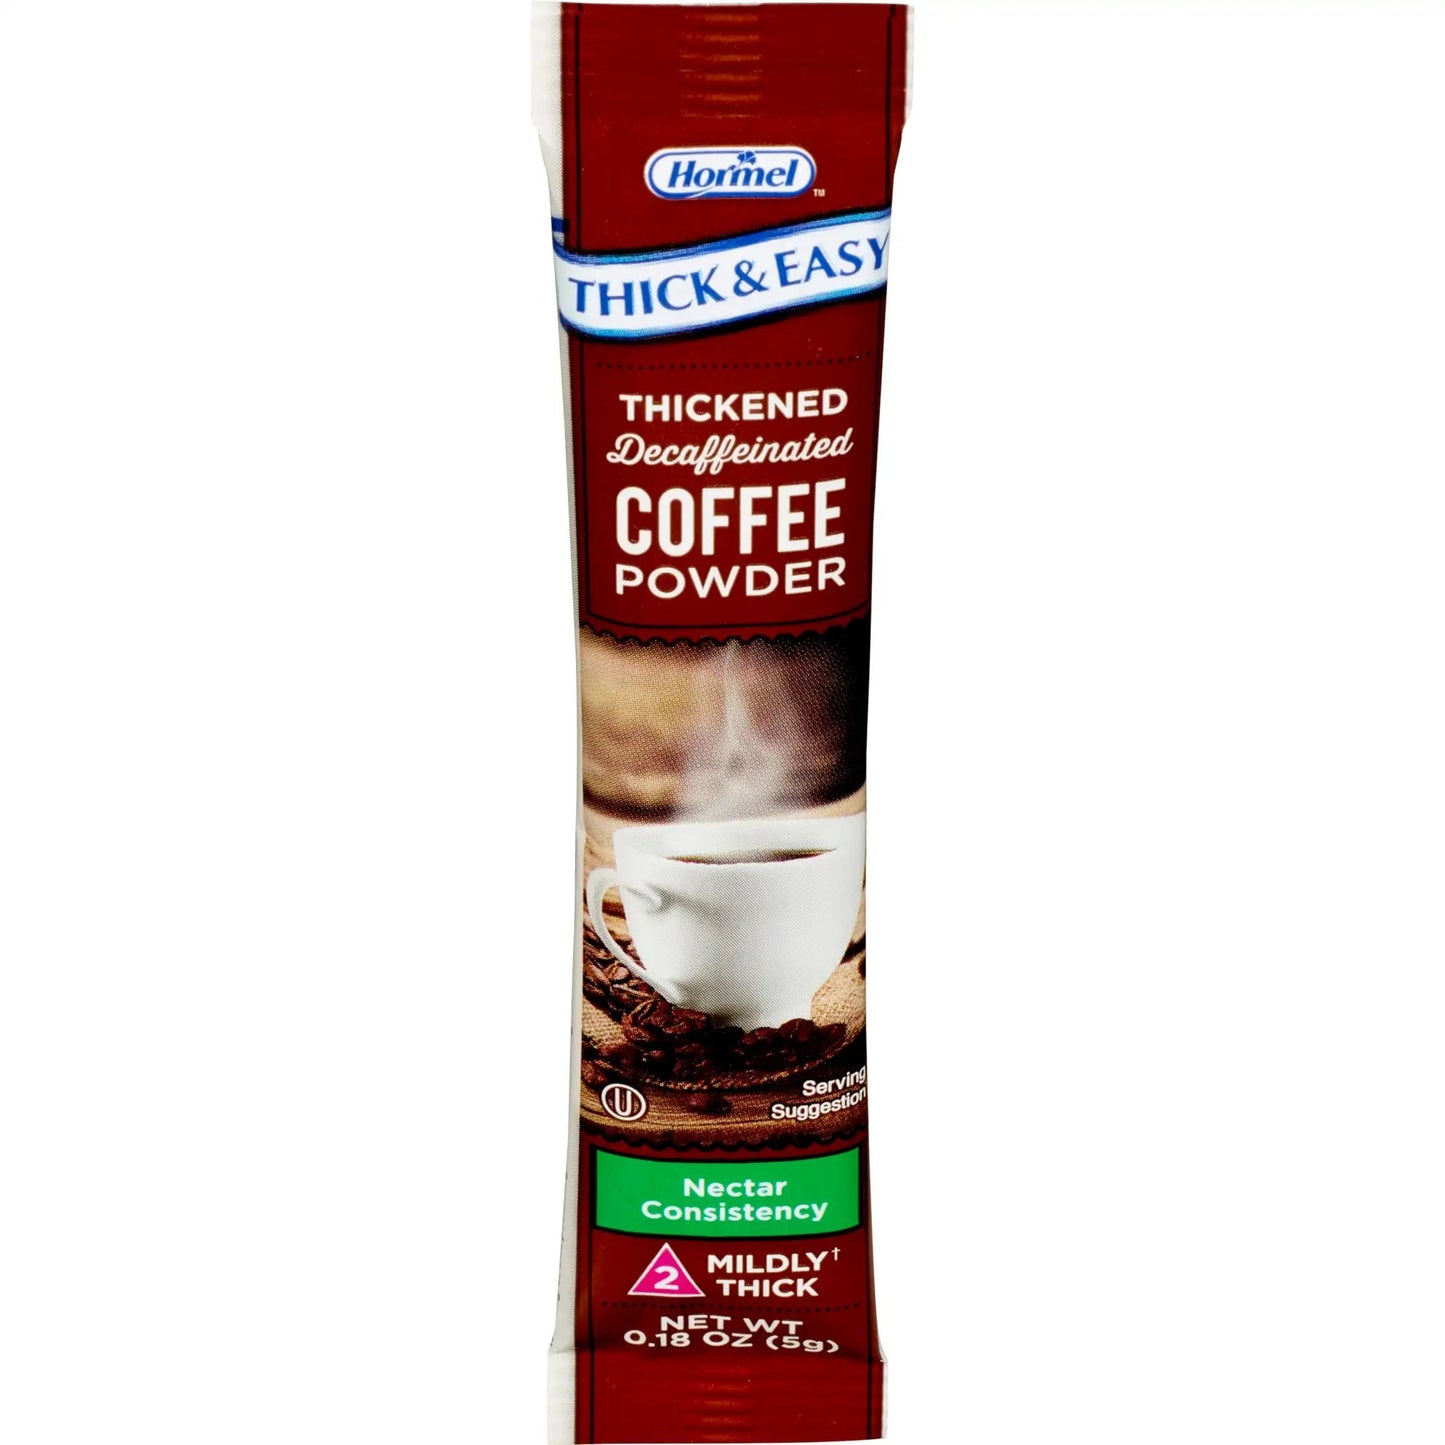 Thick & Easy Nectar Consistency Coffee Thickened Decaffeinated Beverage | 7 Gram